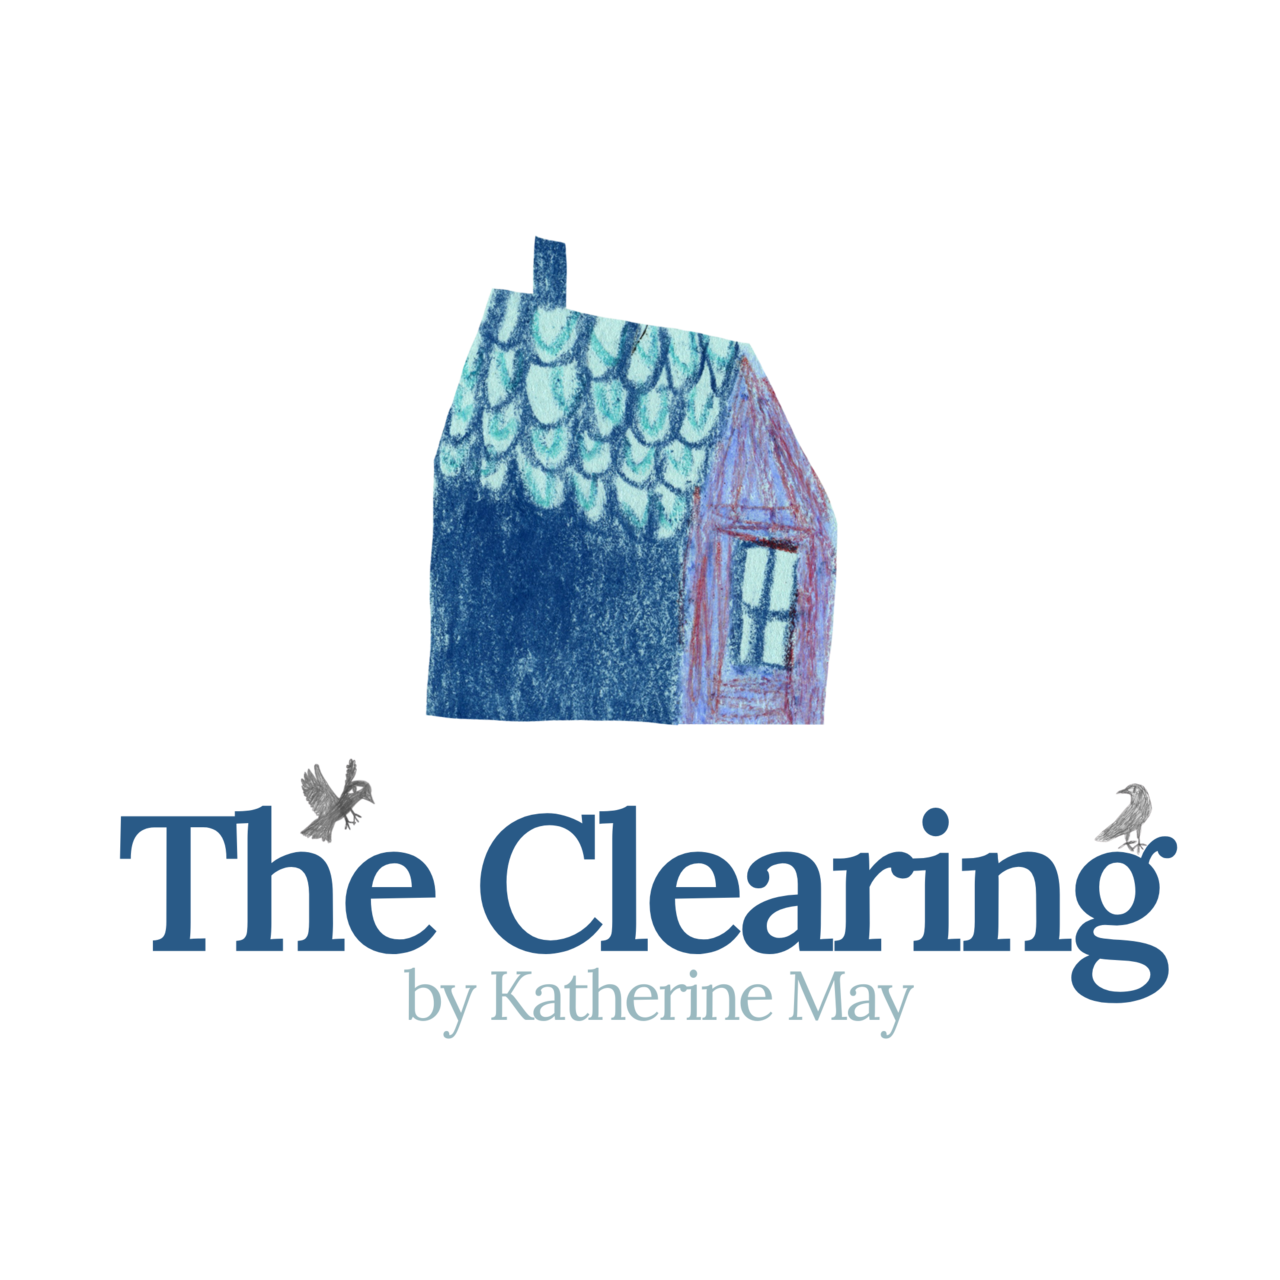 The Clearing by Katherine May